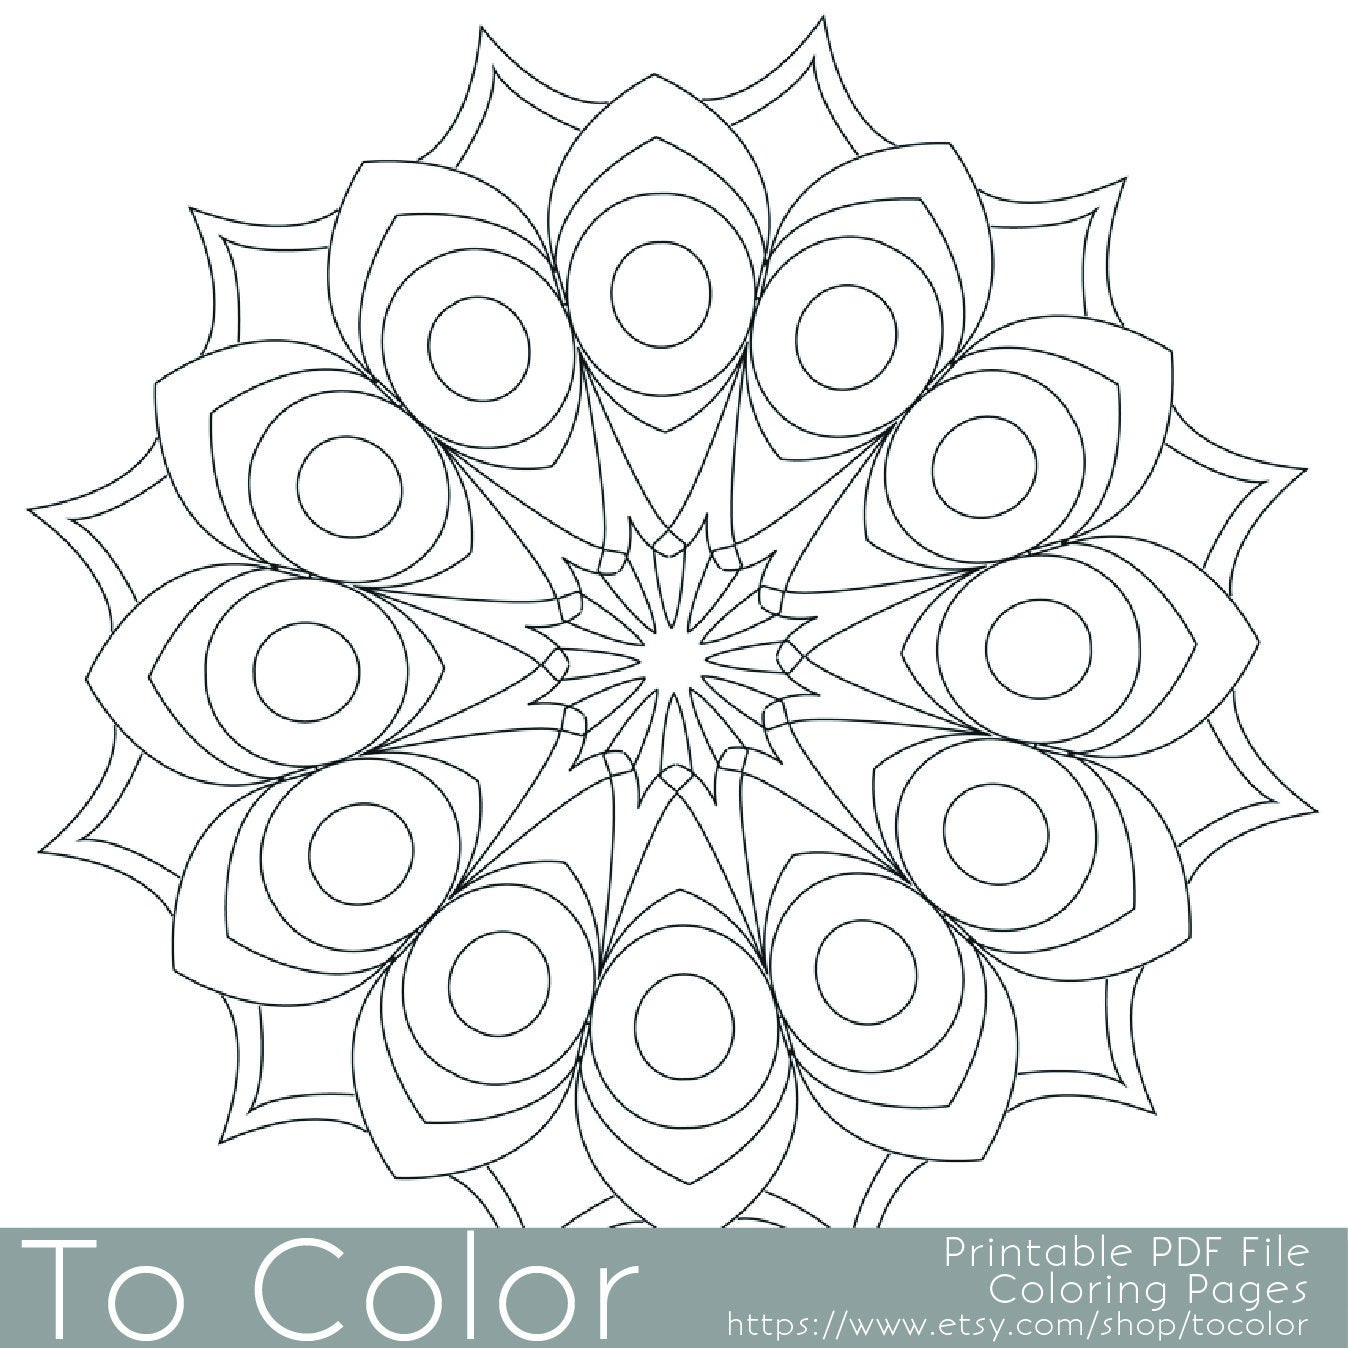 Easy Coloring Pages For Adults
 Printable Circular Mandala Easy Coloring Pages for Adults Big